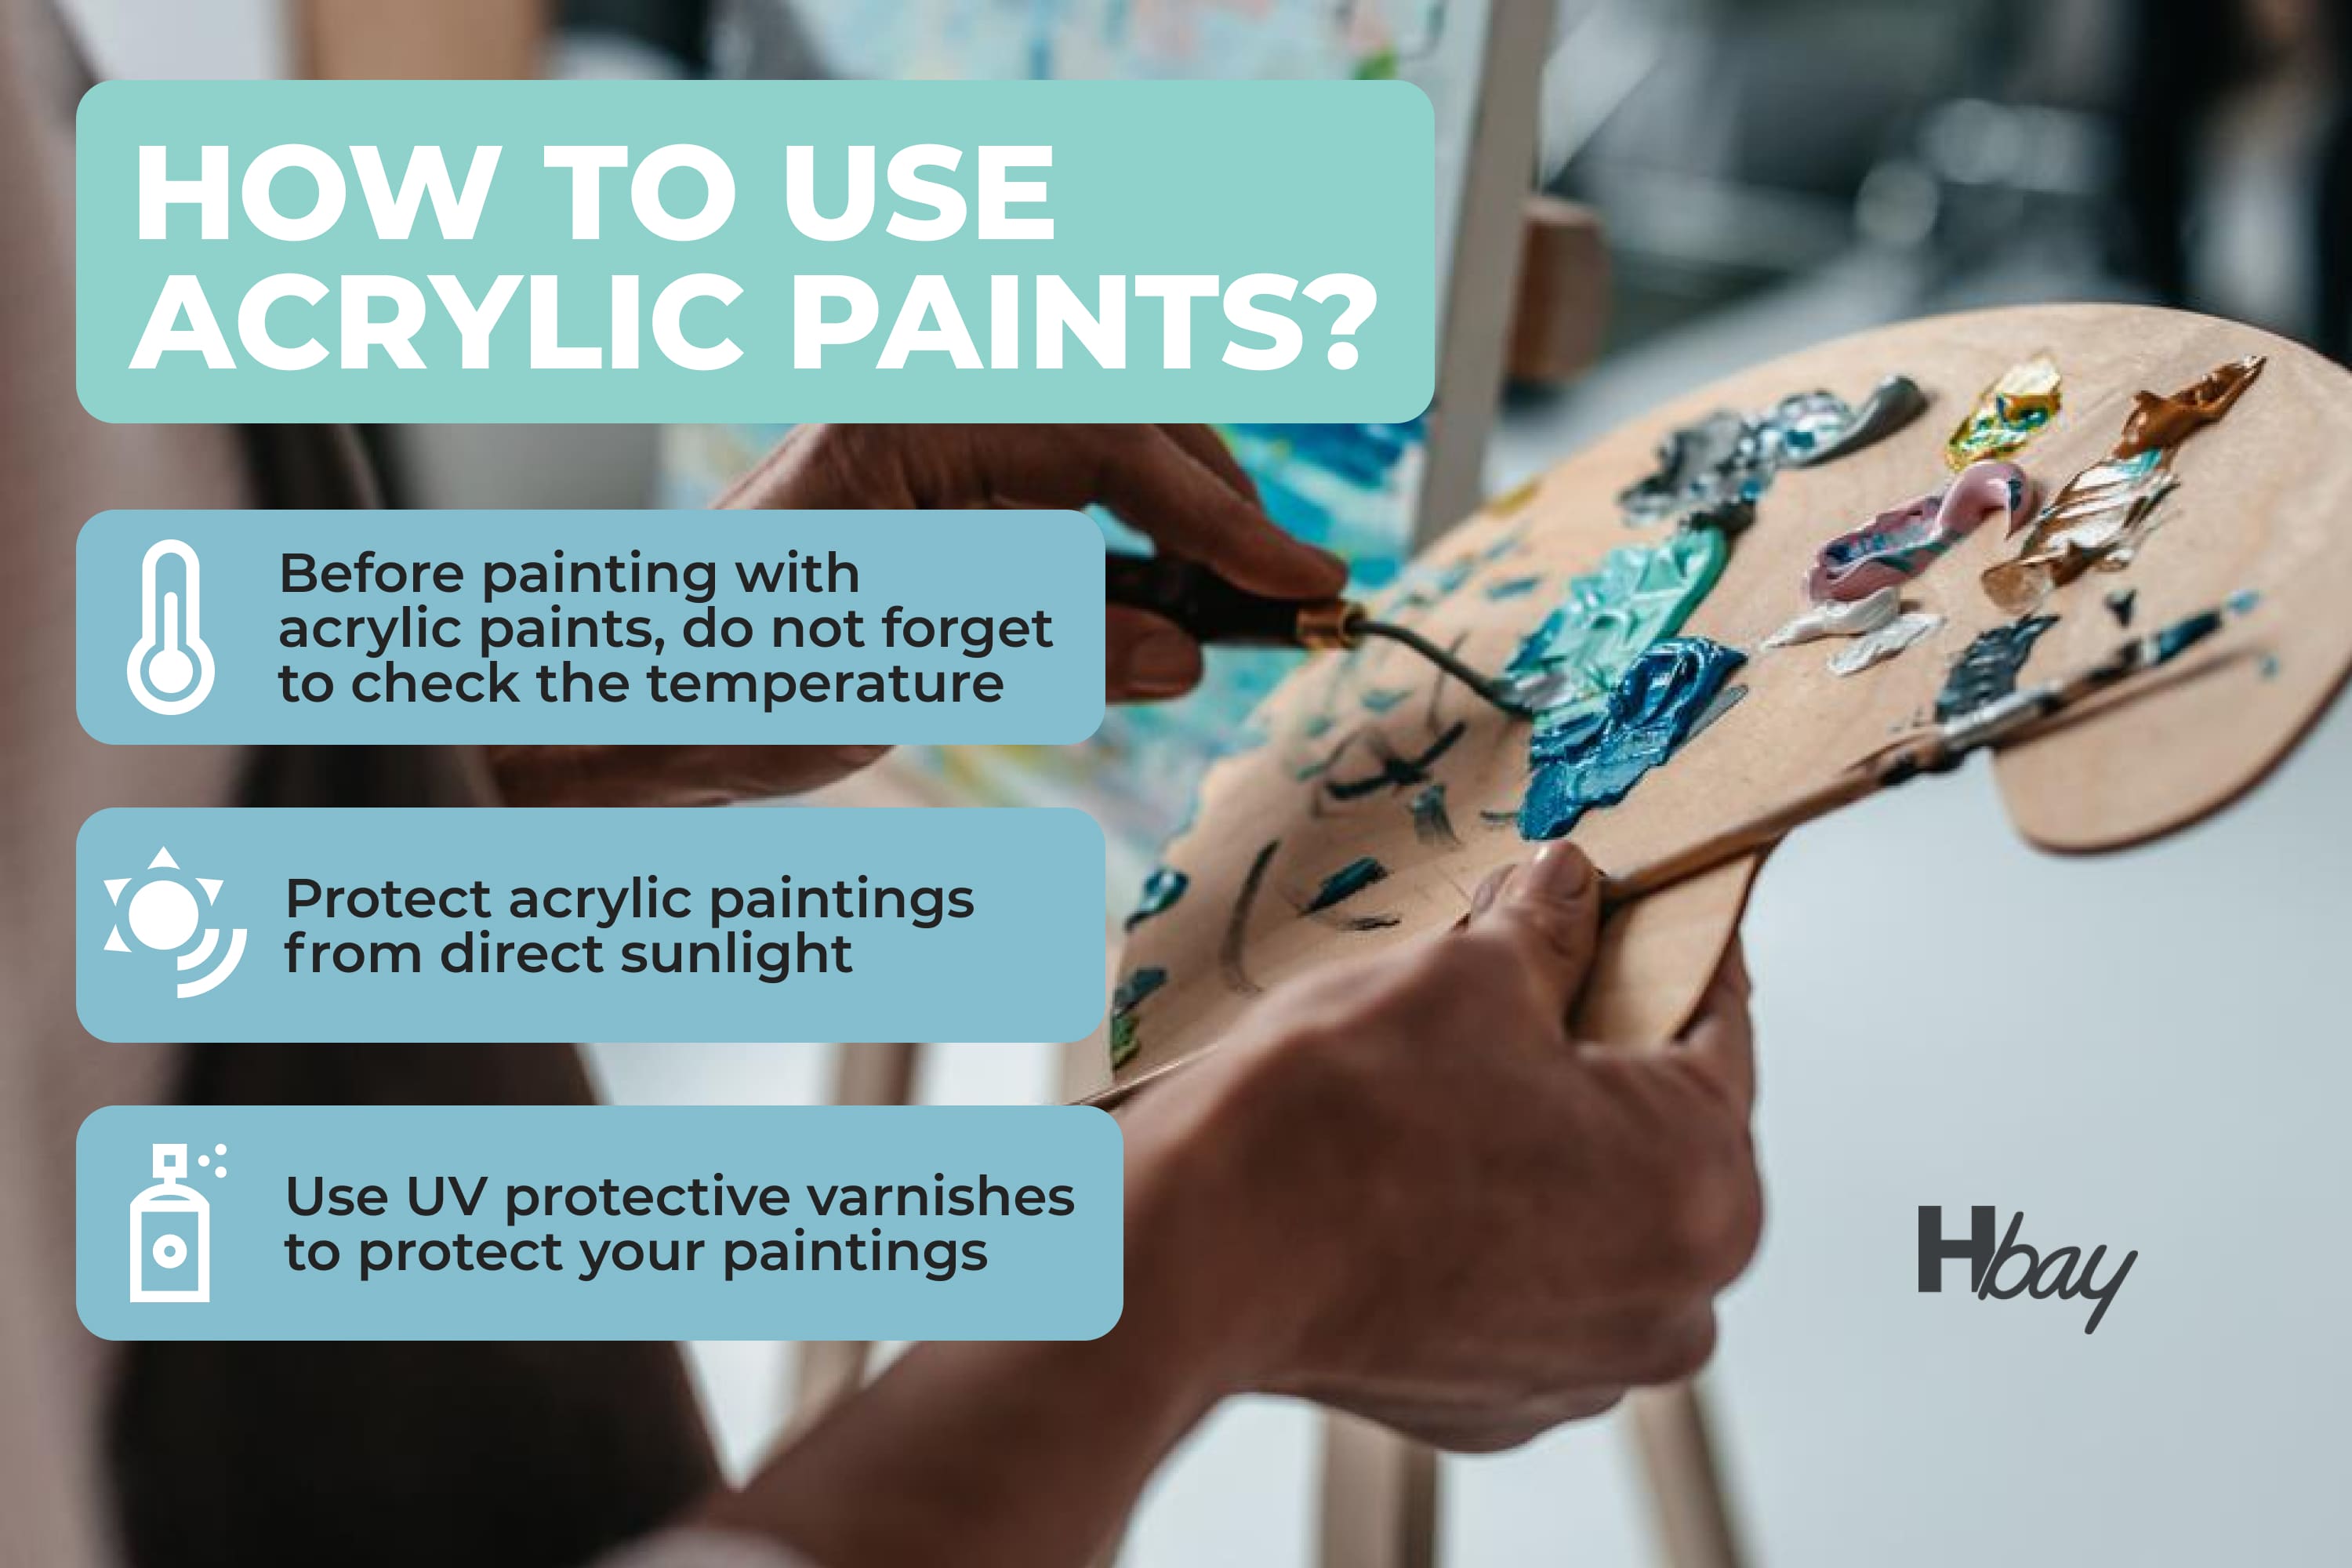 How to use acrylic paints